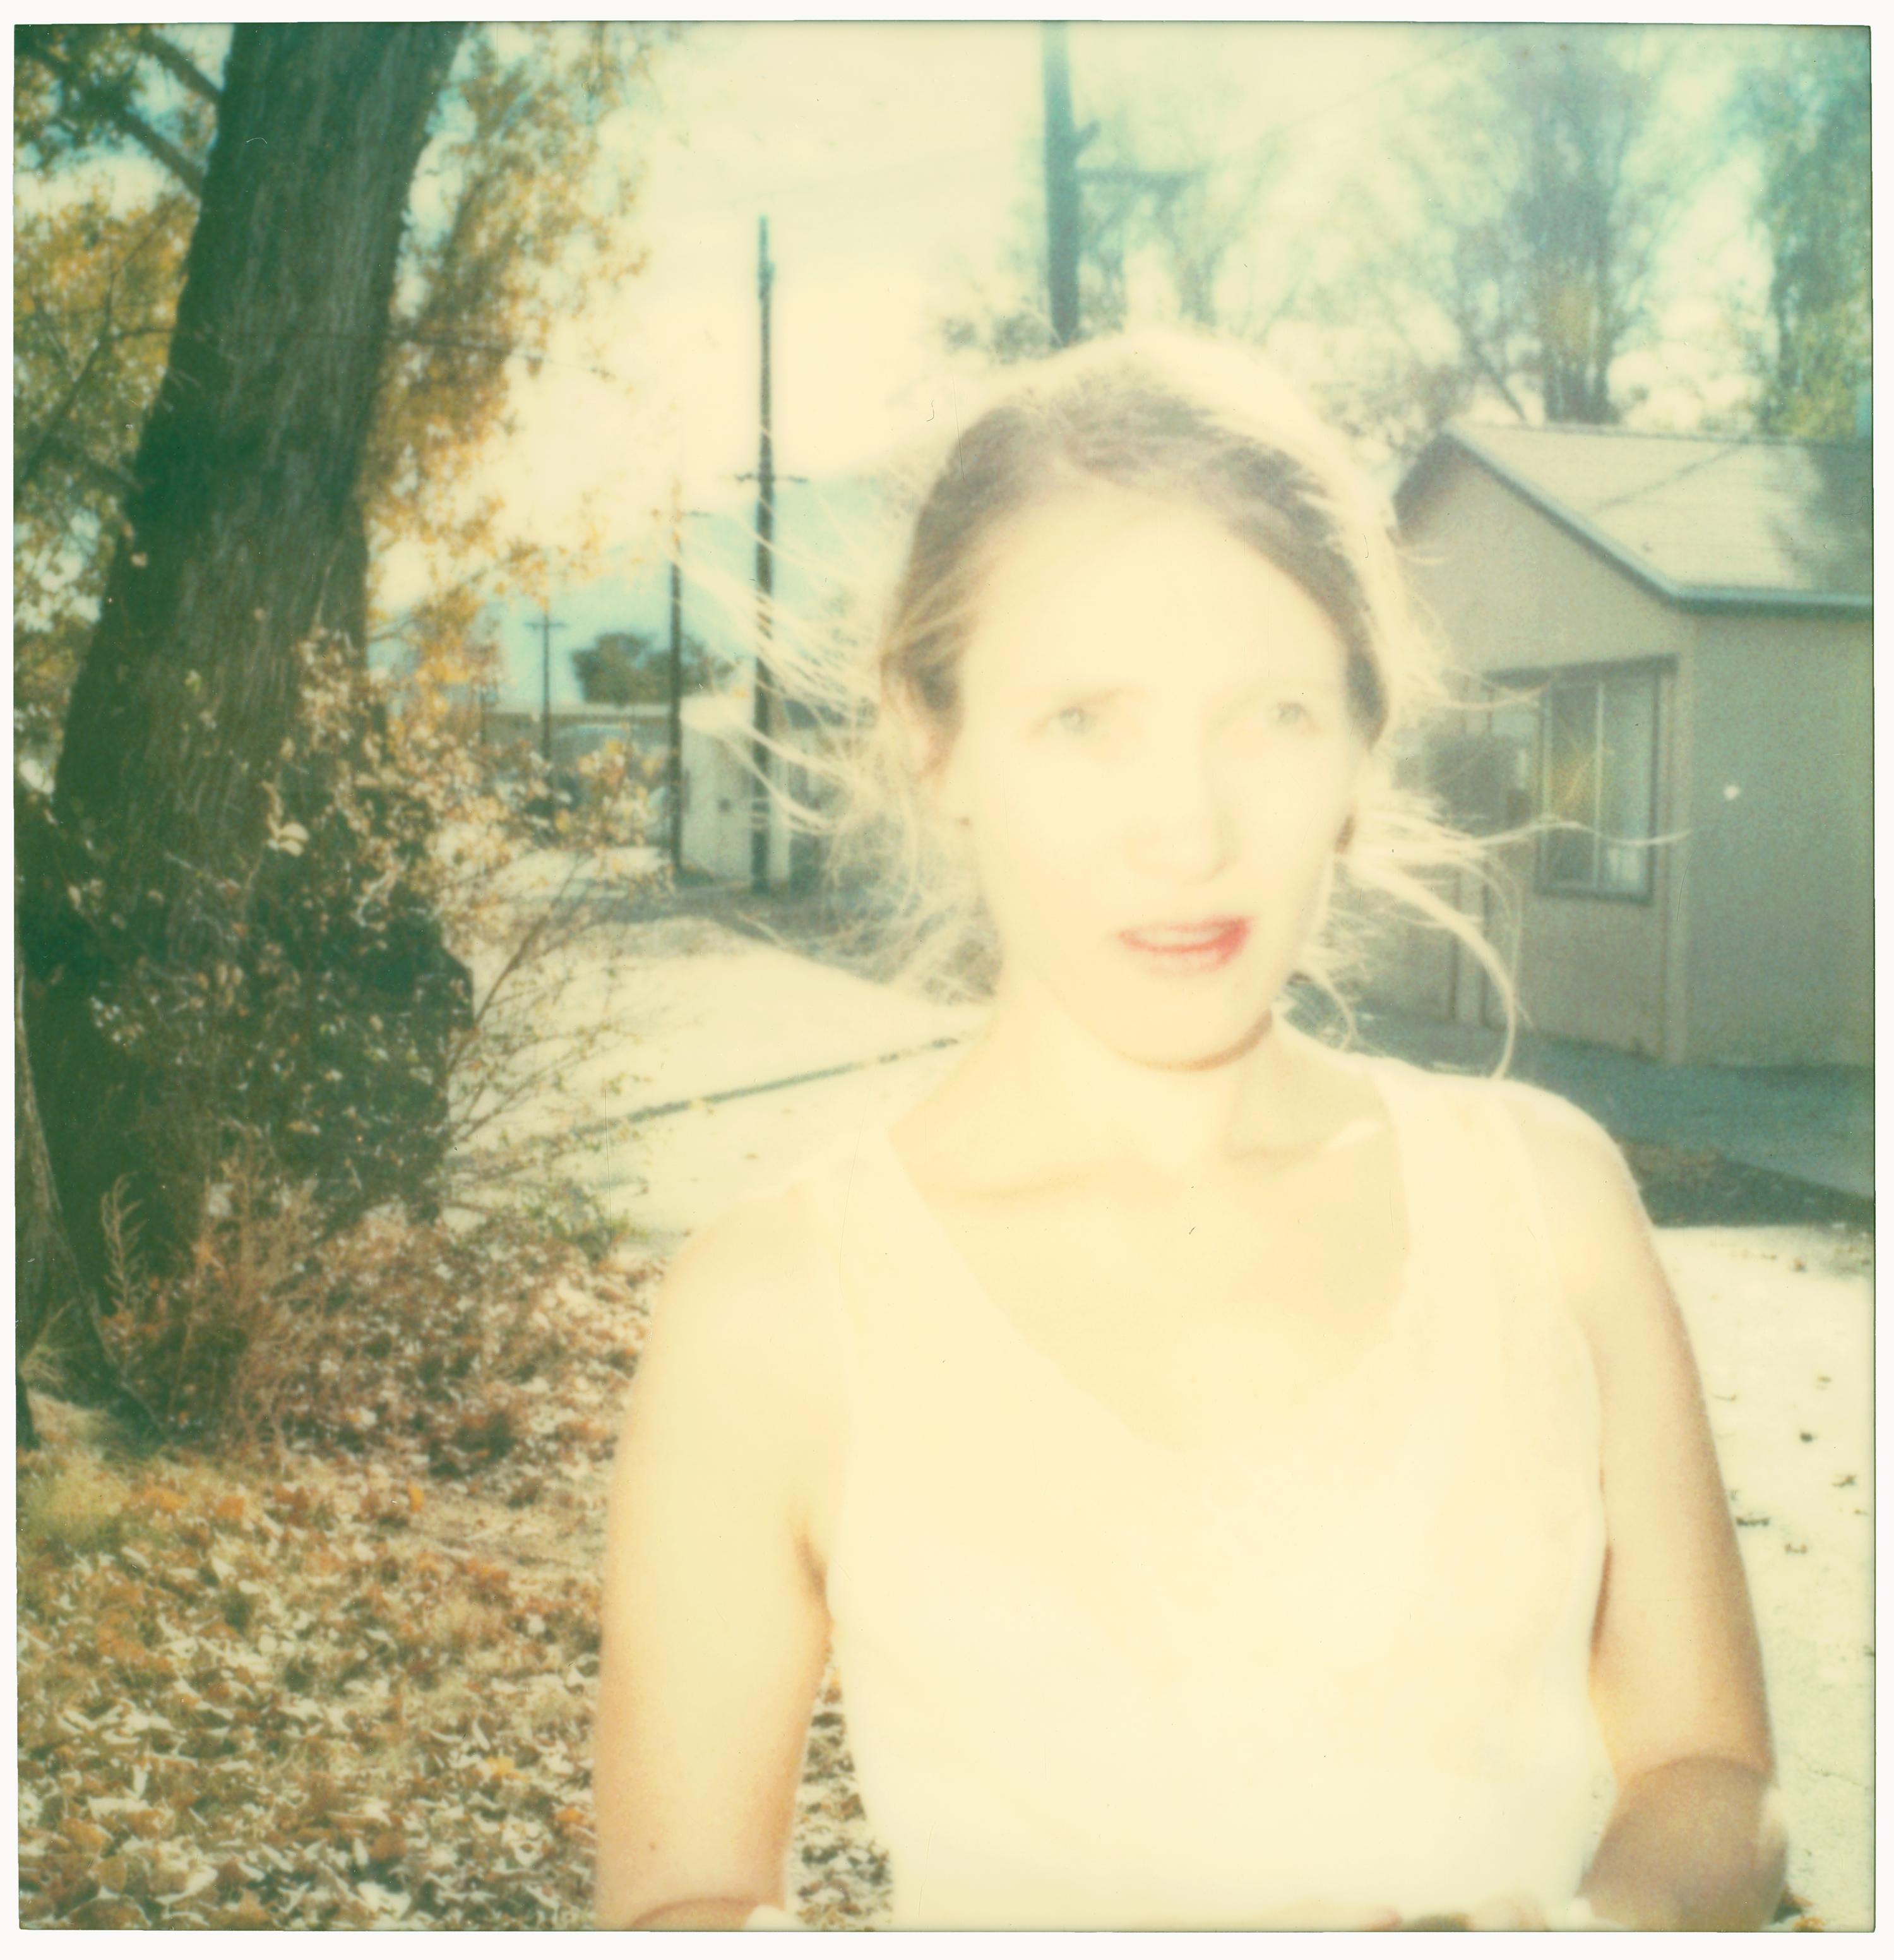 Back Alley II (The Last Picture Show) - 21st Century, Polaroid, Color